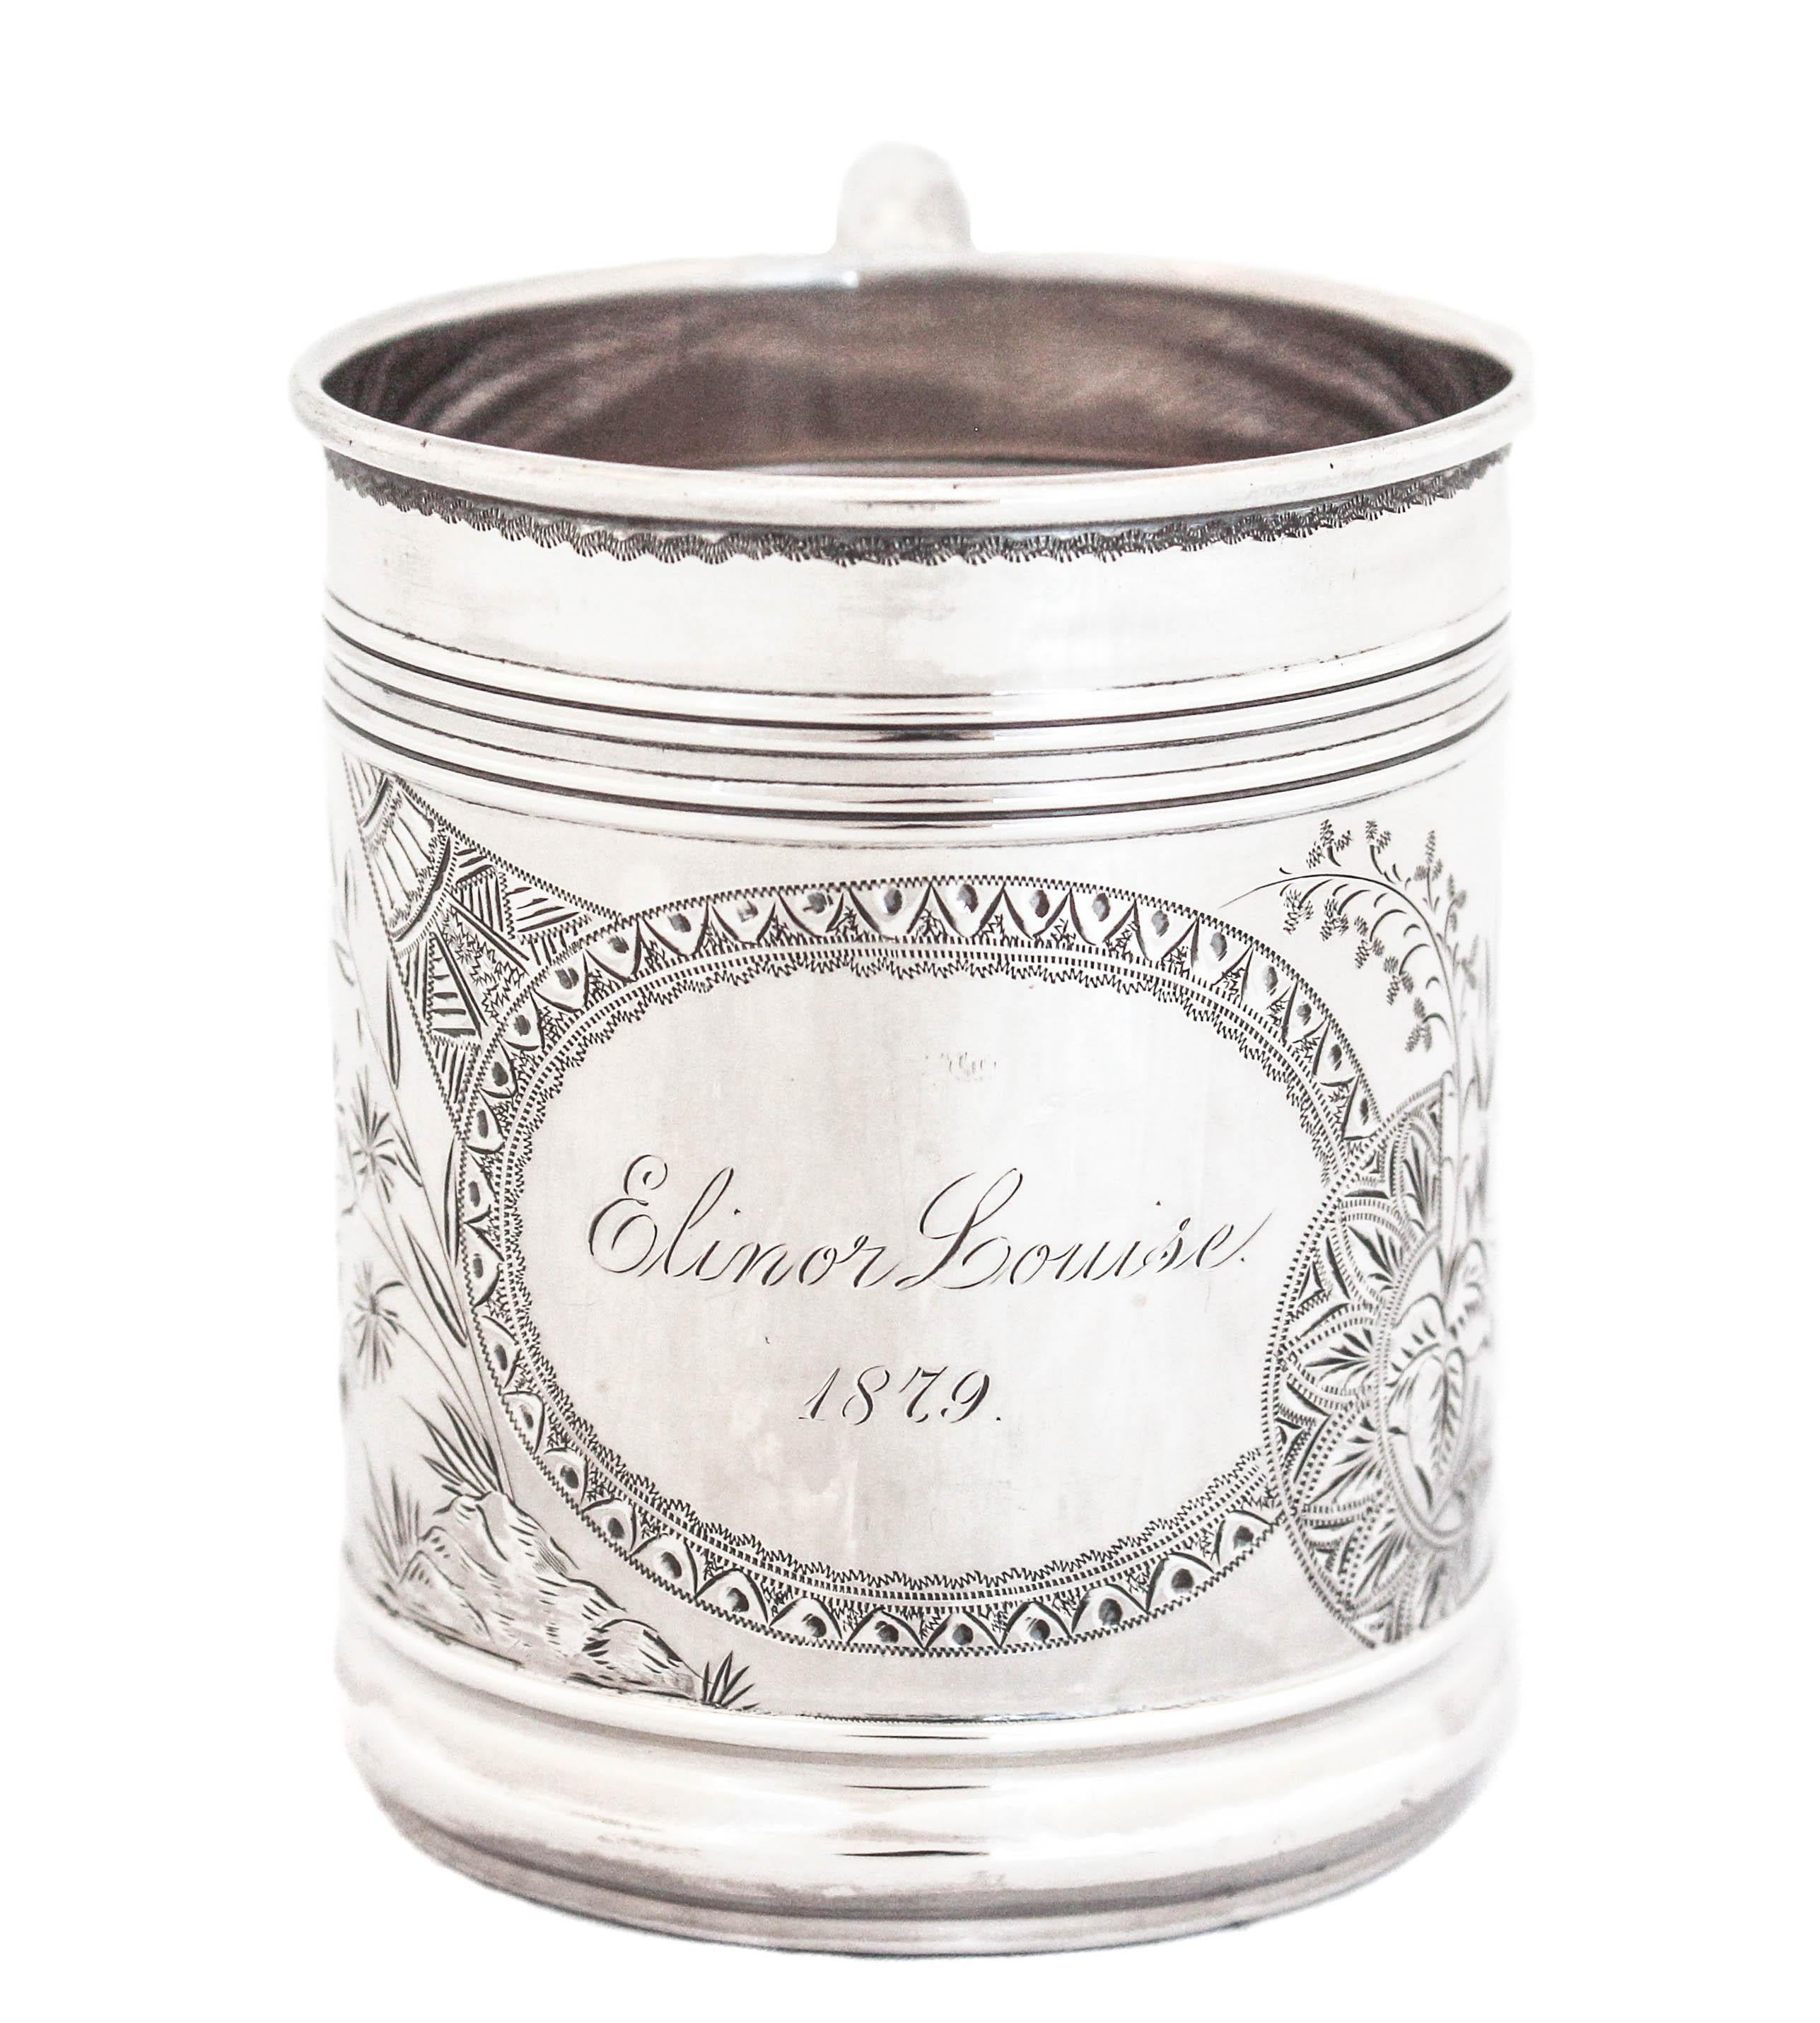 Being offered is a sterling silver mug by J. B. & S. M. Knowles of Providence, Rhode Island.  Engraved “Elinor Louise 1879” in the center of the cartouche it also has leaves and other decorative motifs on each side.  Gifted 144 years ago at the time